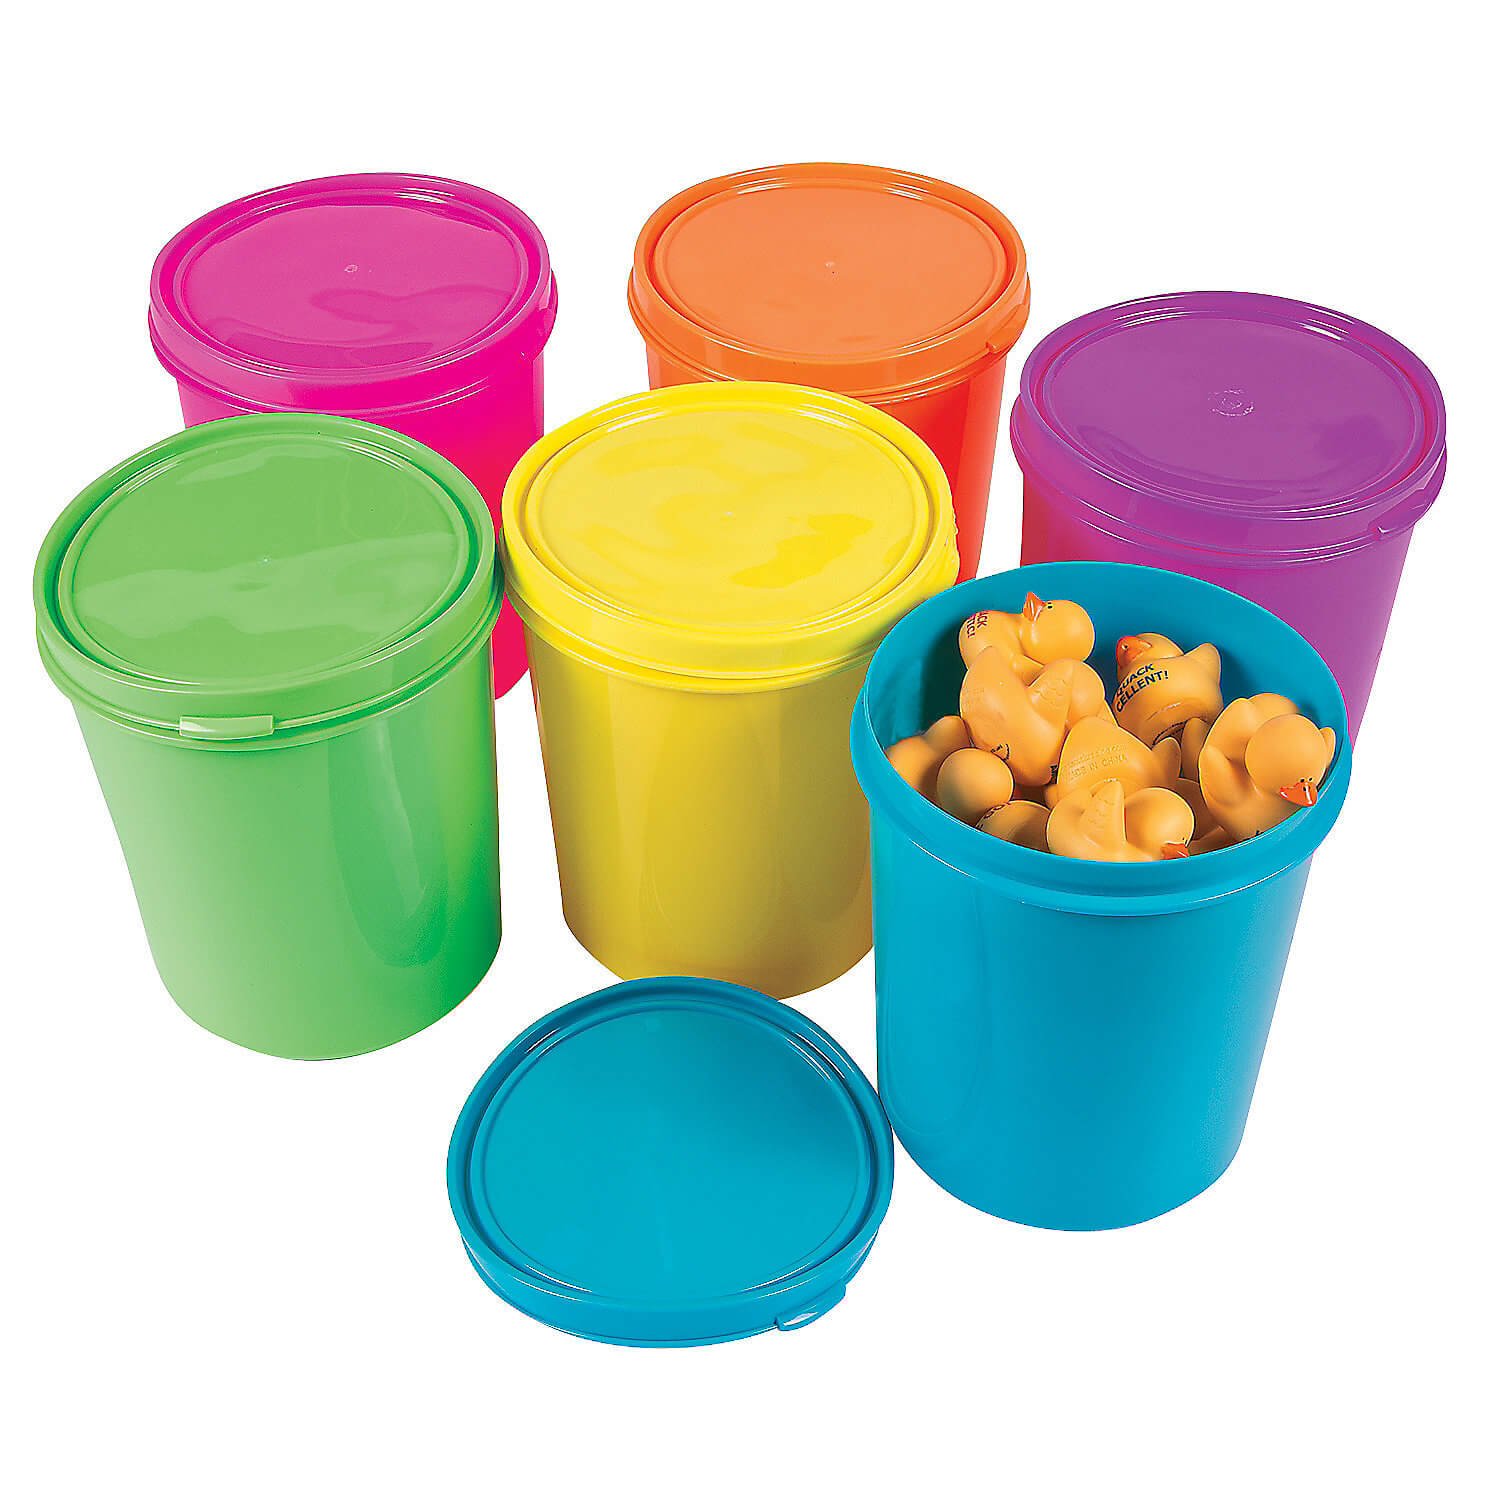 W13685666 Neon Round Containers With Lids - 6 Pc.